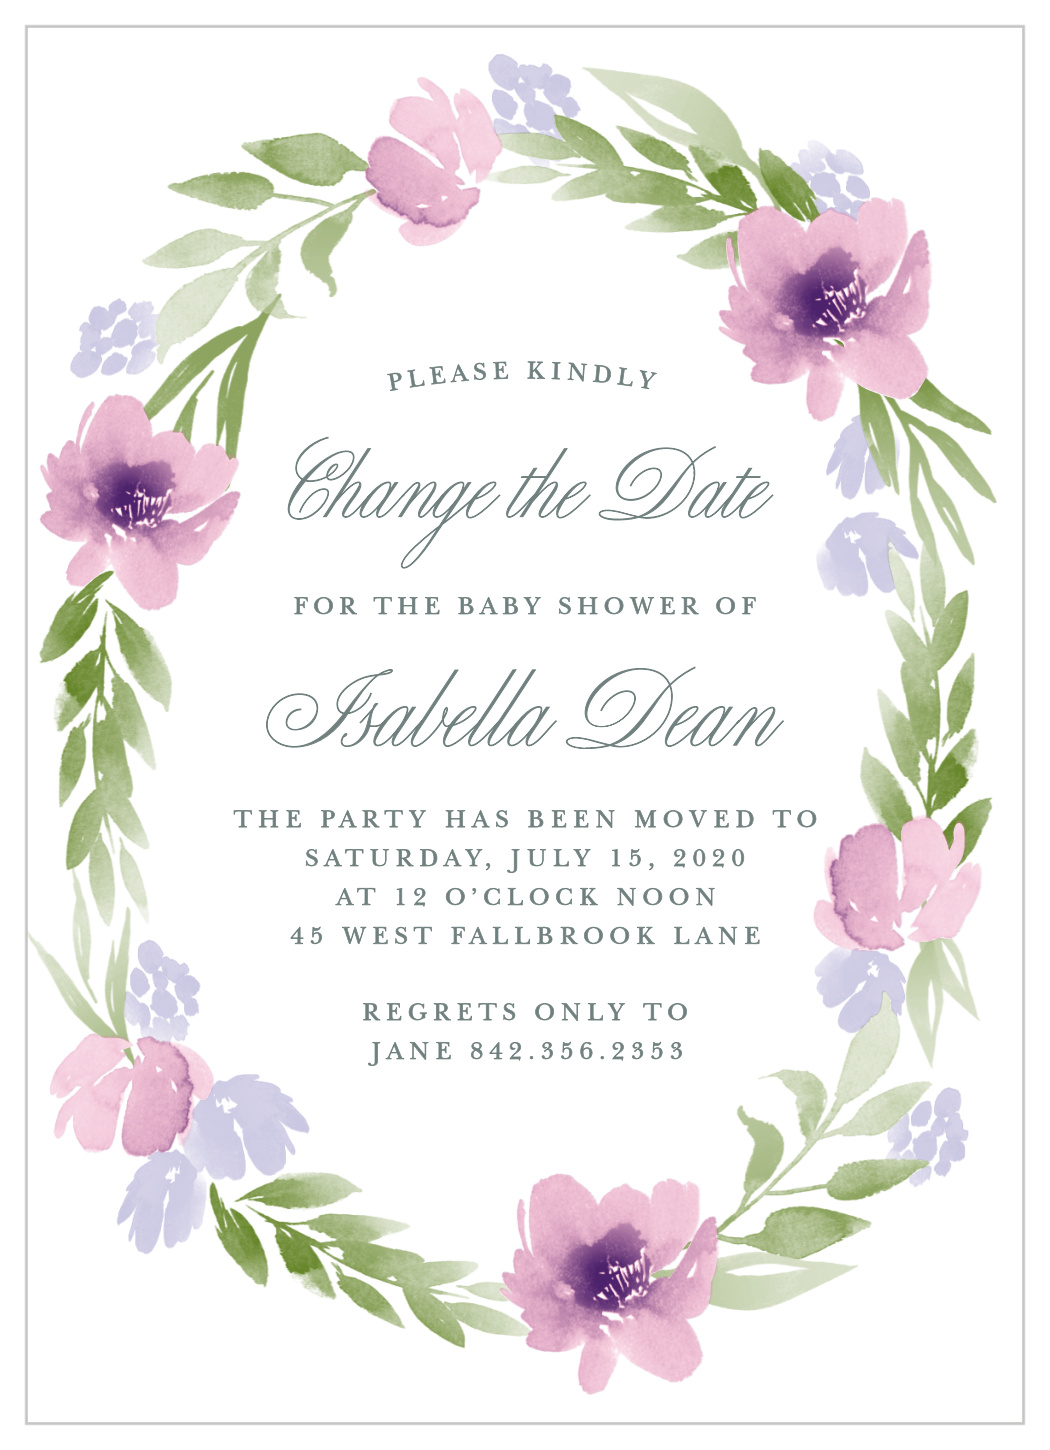 Floral Delight Baby Shower Change the Date